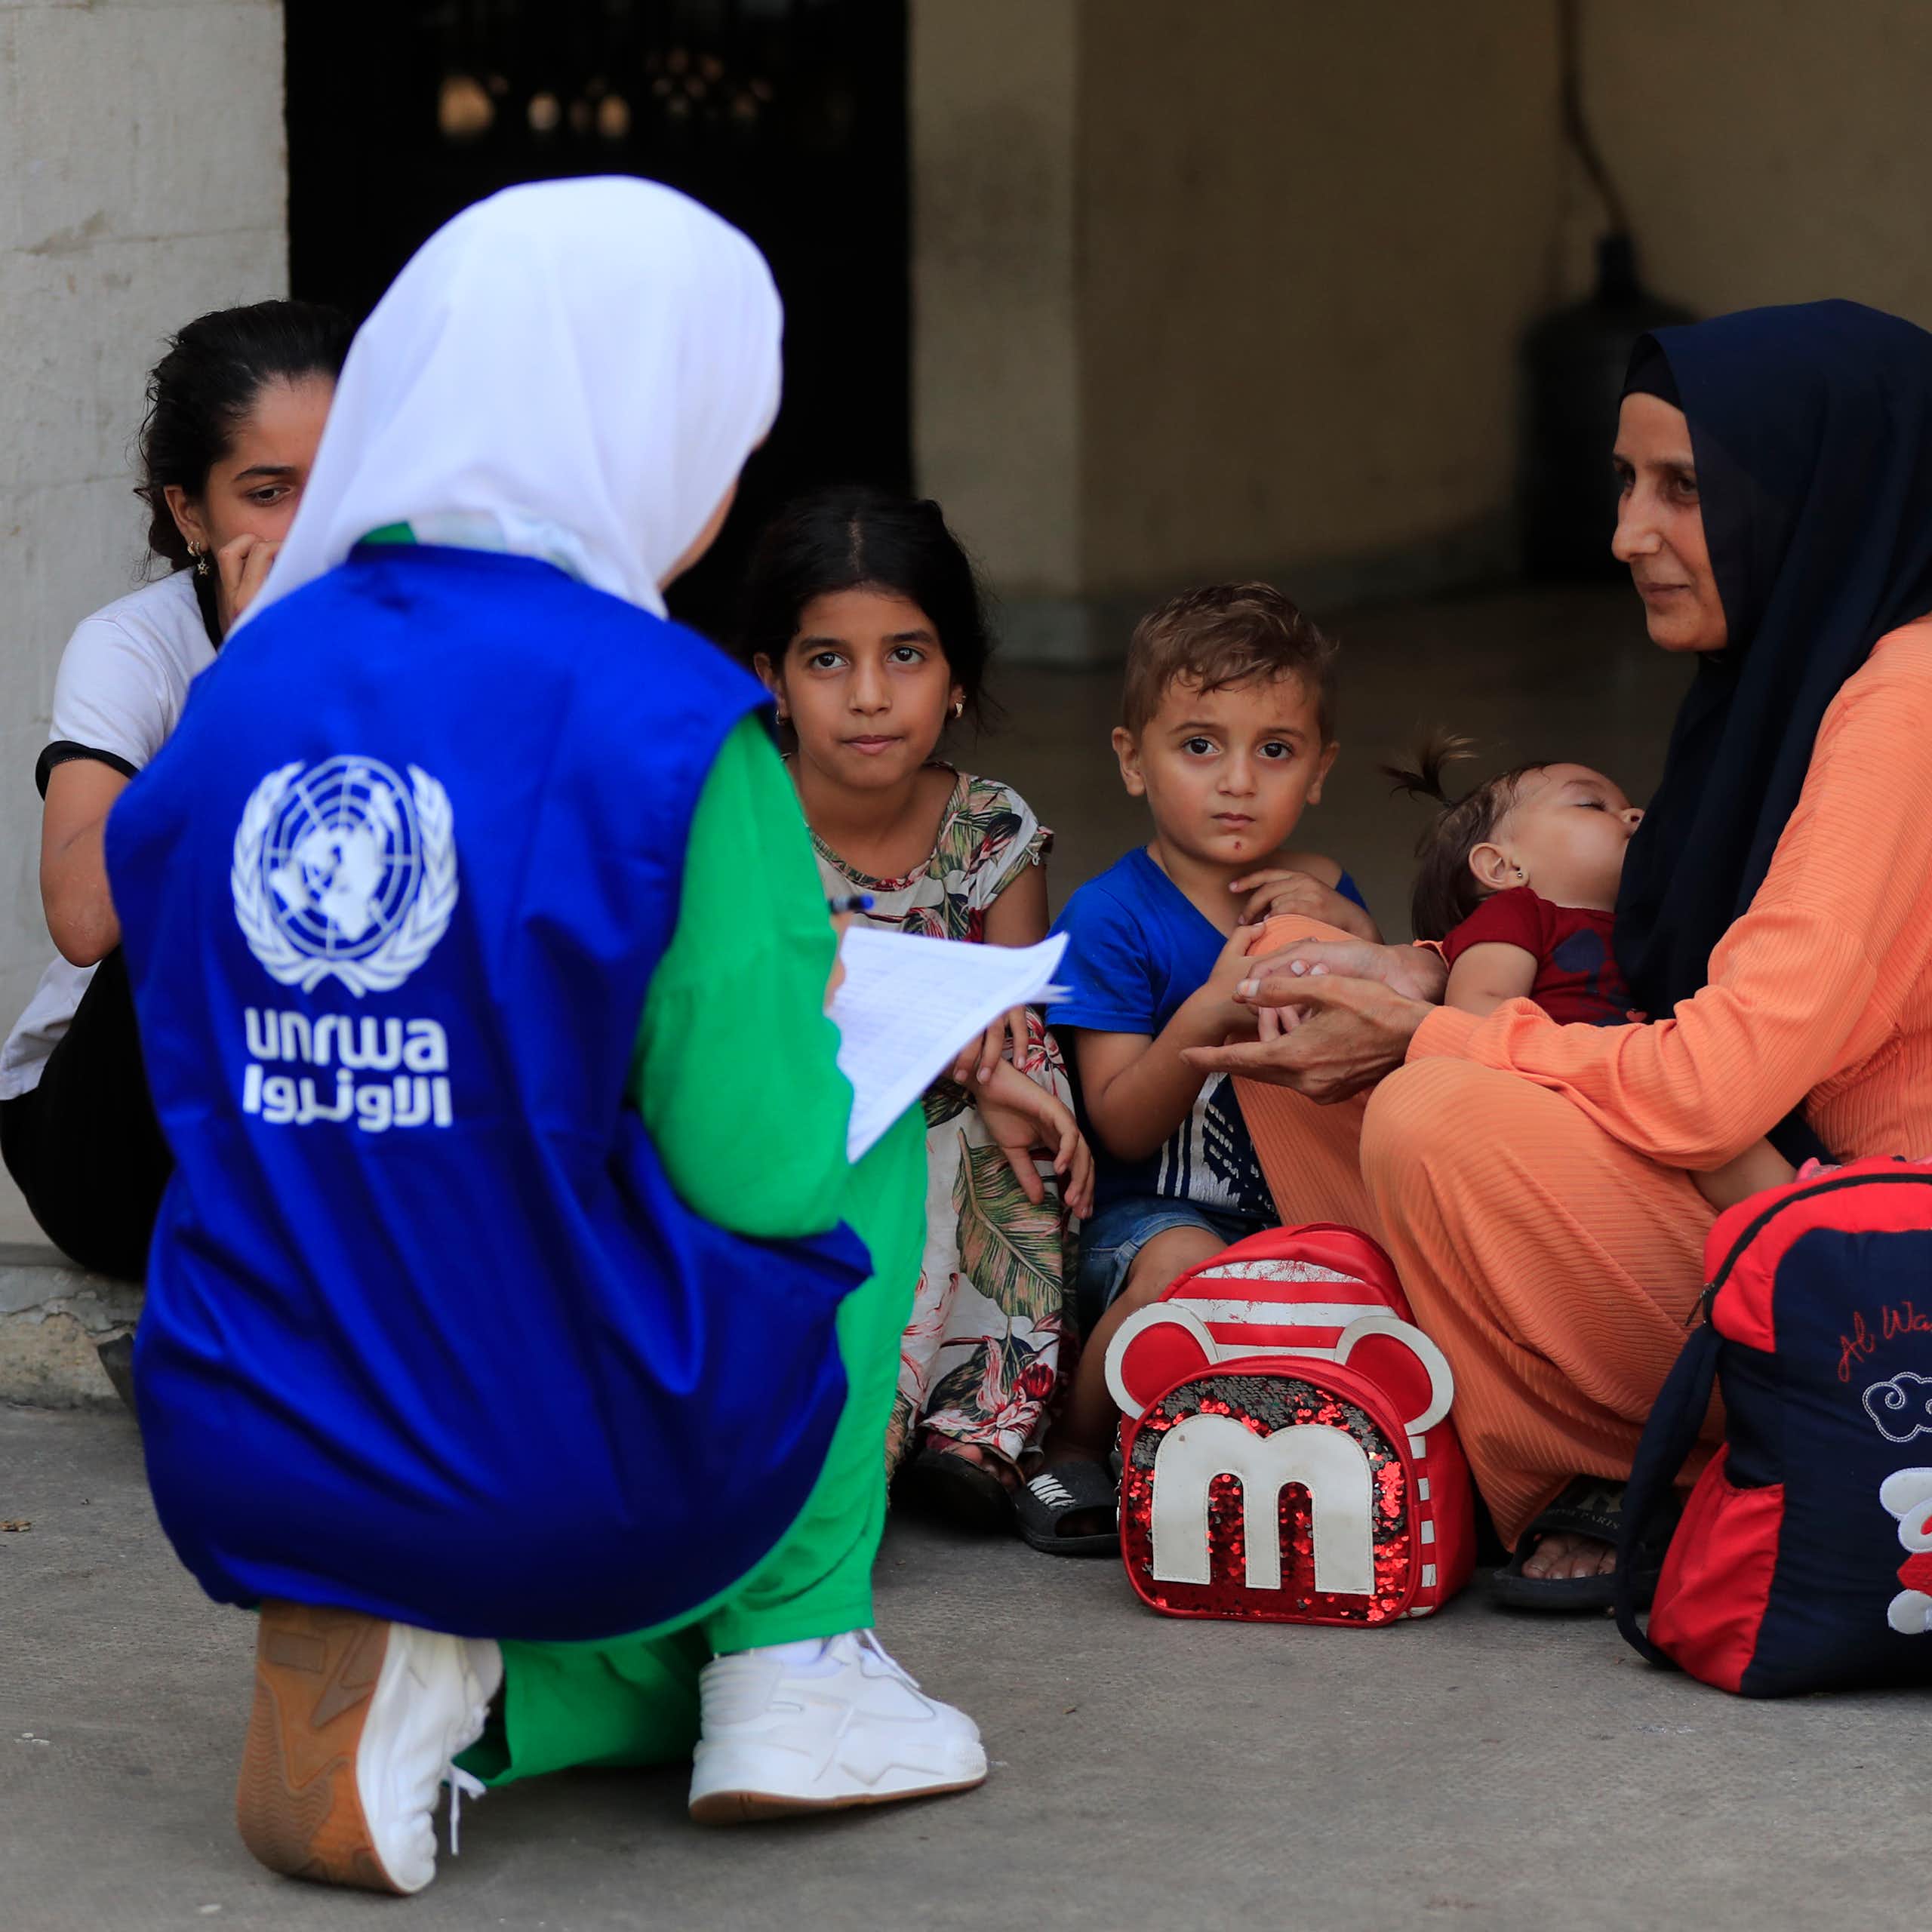 A woman wearing a blue UNRWA vest speaks to a woman with young children.